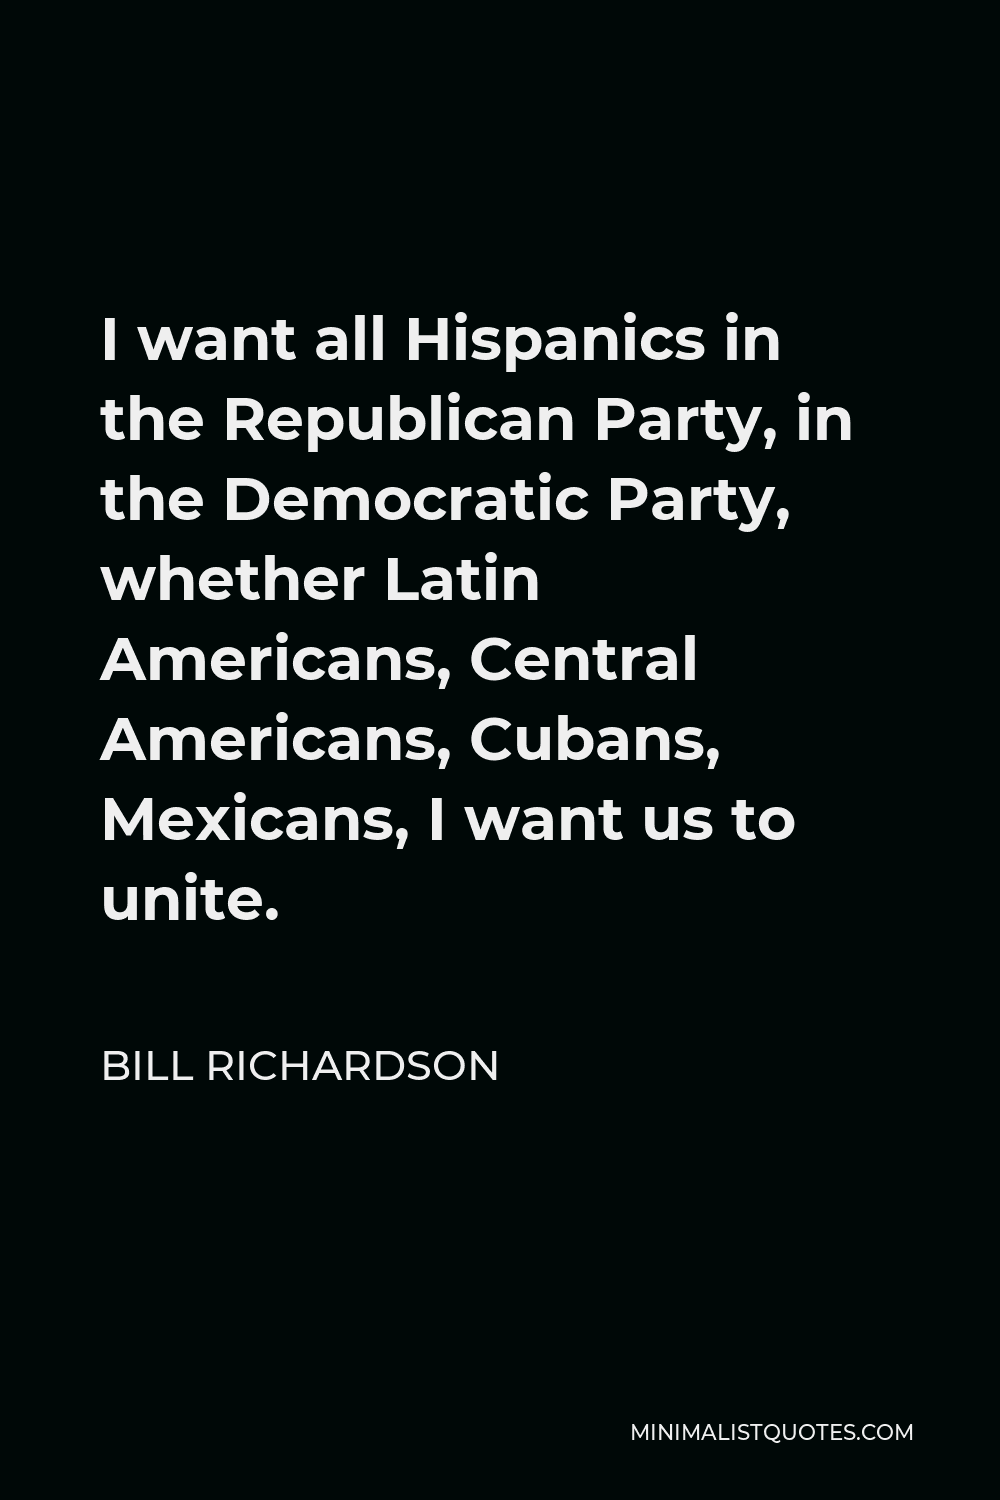 Bill Richardson Quote - I want all Hispanics in the Republican Party, in the Democratic Party, whether Latin Americans, Central Americans, Cubans, Mexicans, I want us to unite.